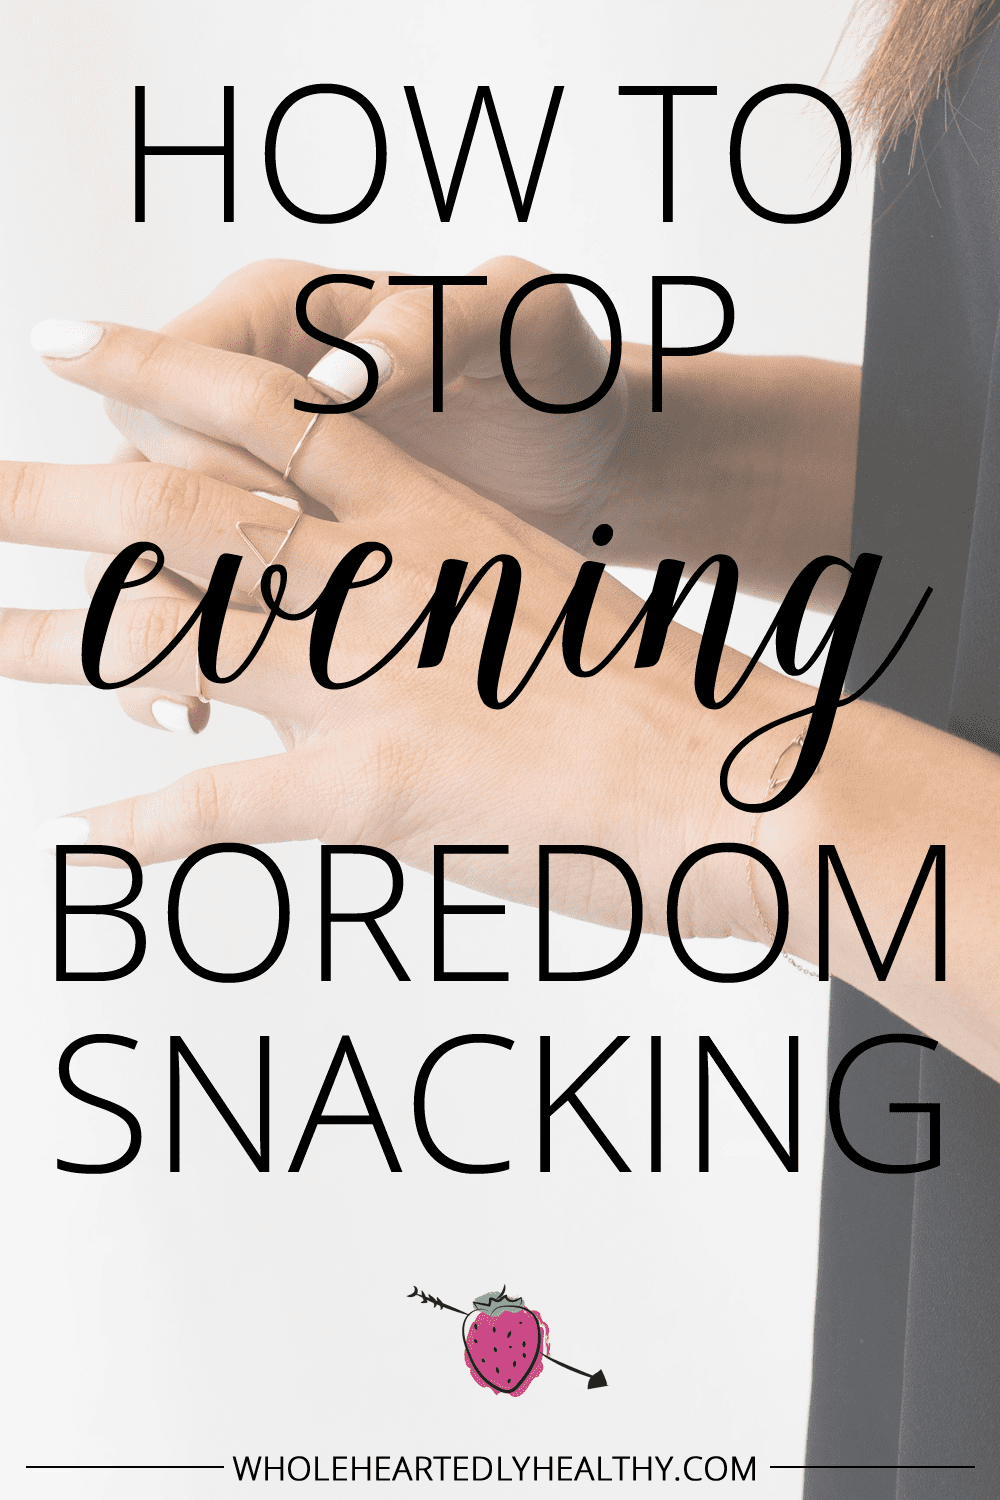 HOW TO stop evening boredom snacking